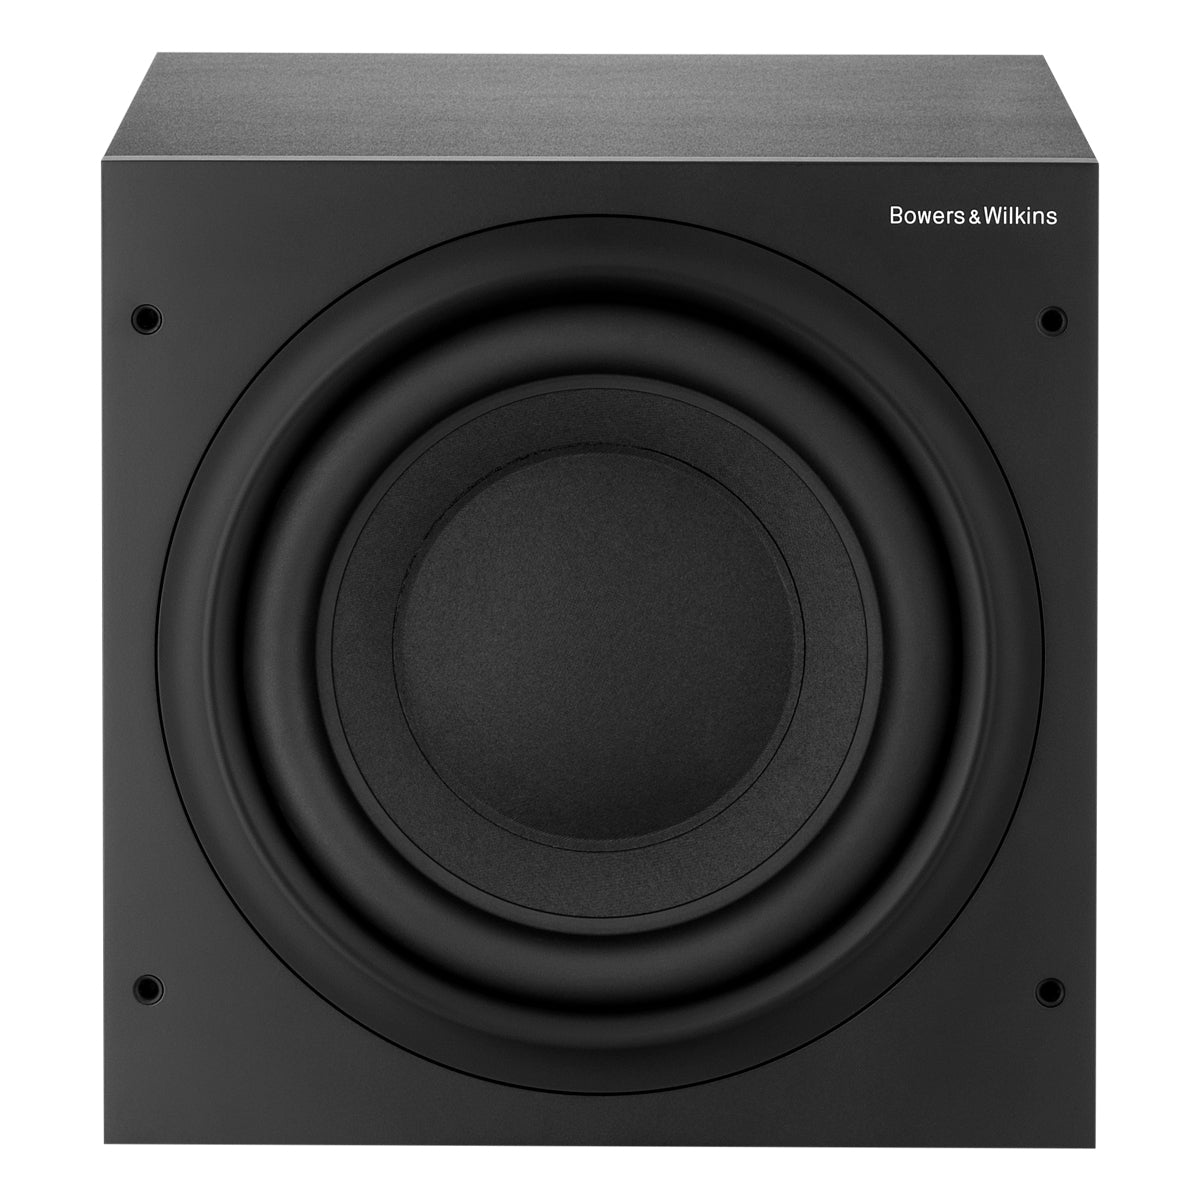 Bowers & Wilkins ASW610XP 10" 500W Subwoofer - Black - The Audio Experts